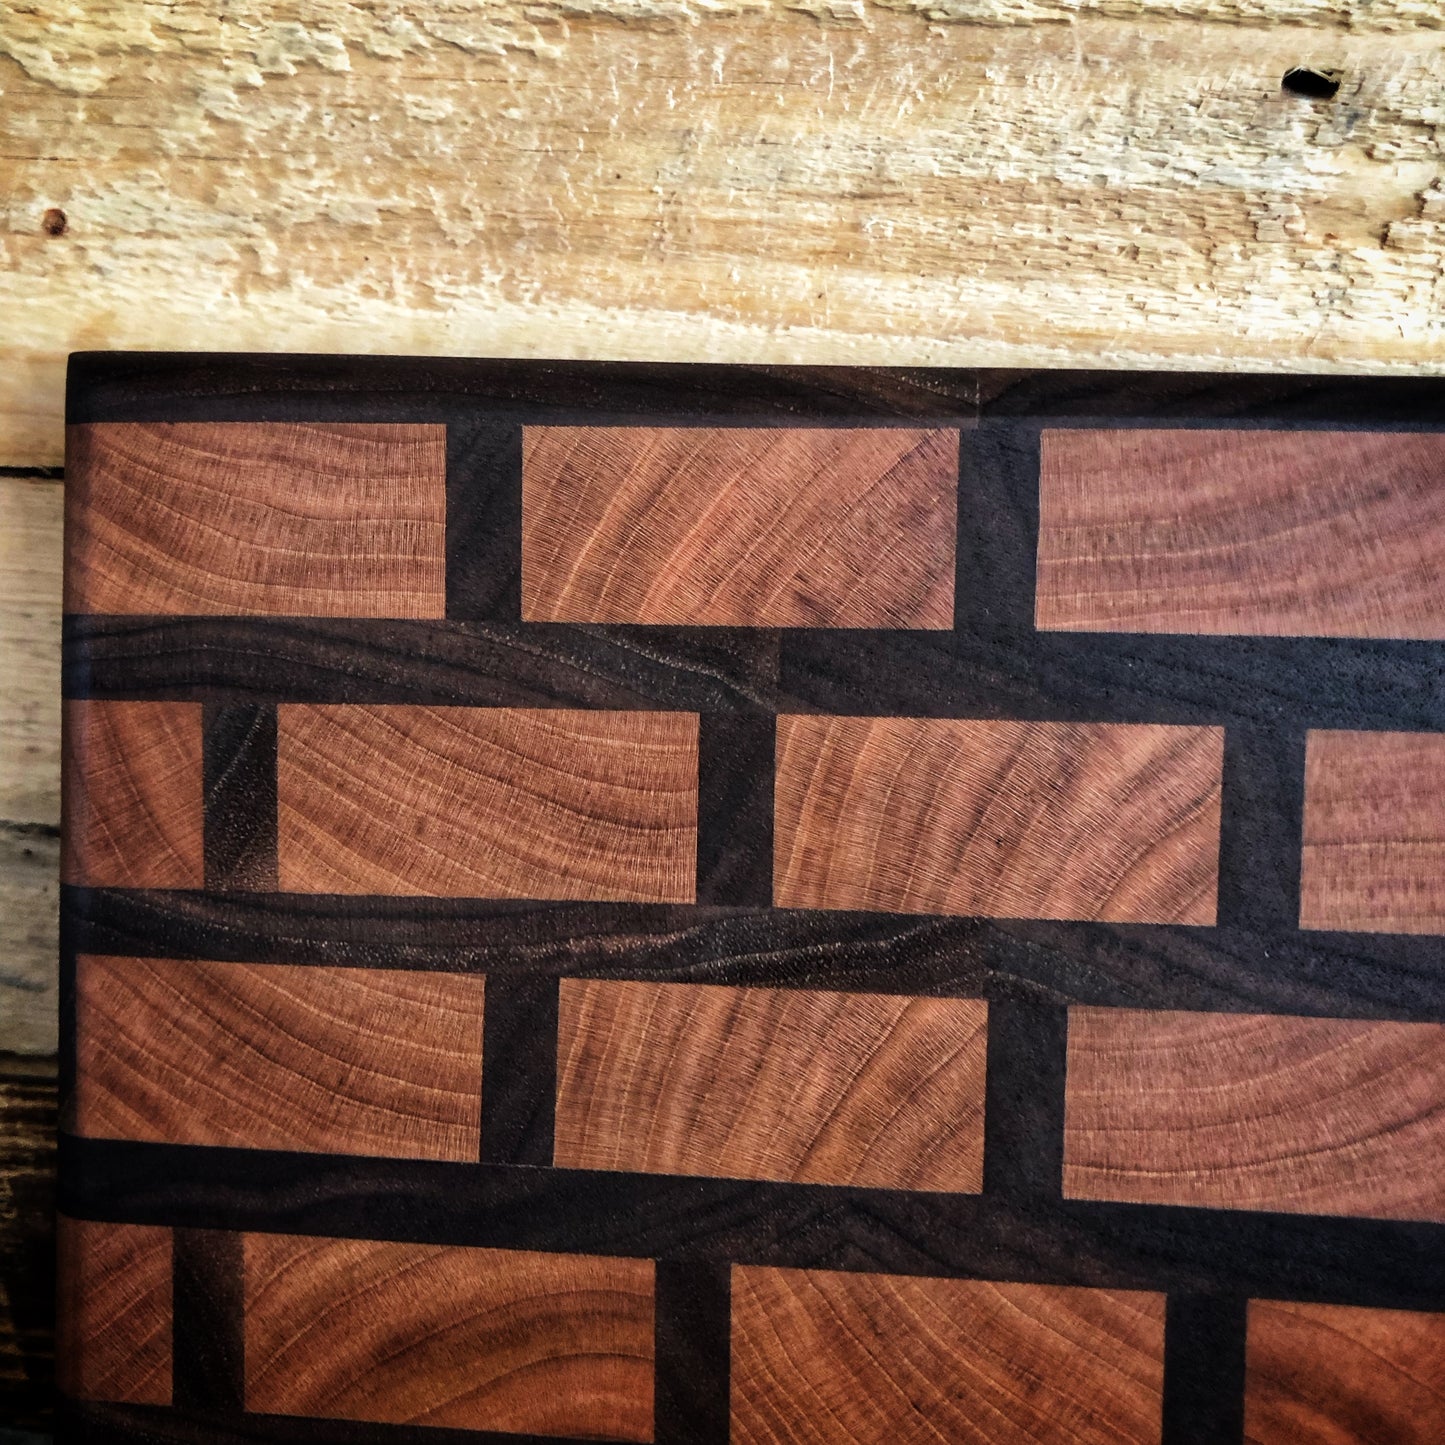 BLEMISHED: End Grain Cheese Board - Brick Pattern